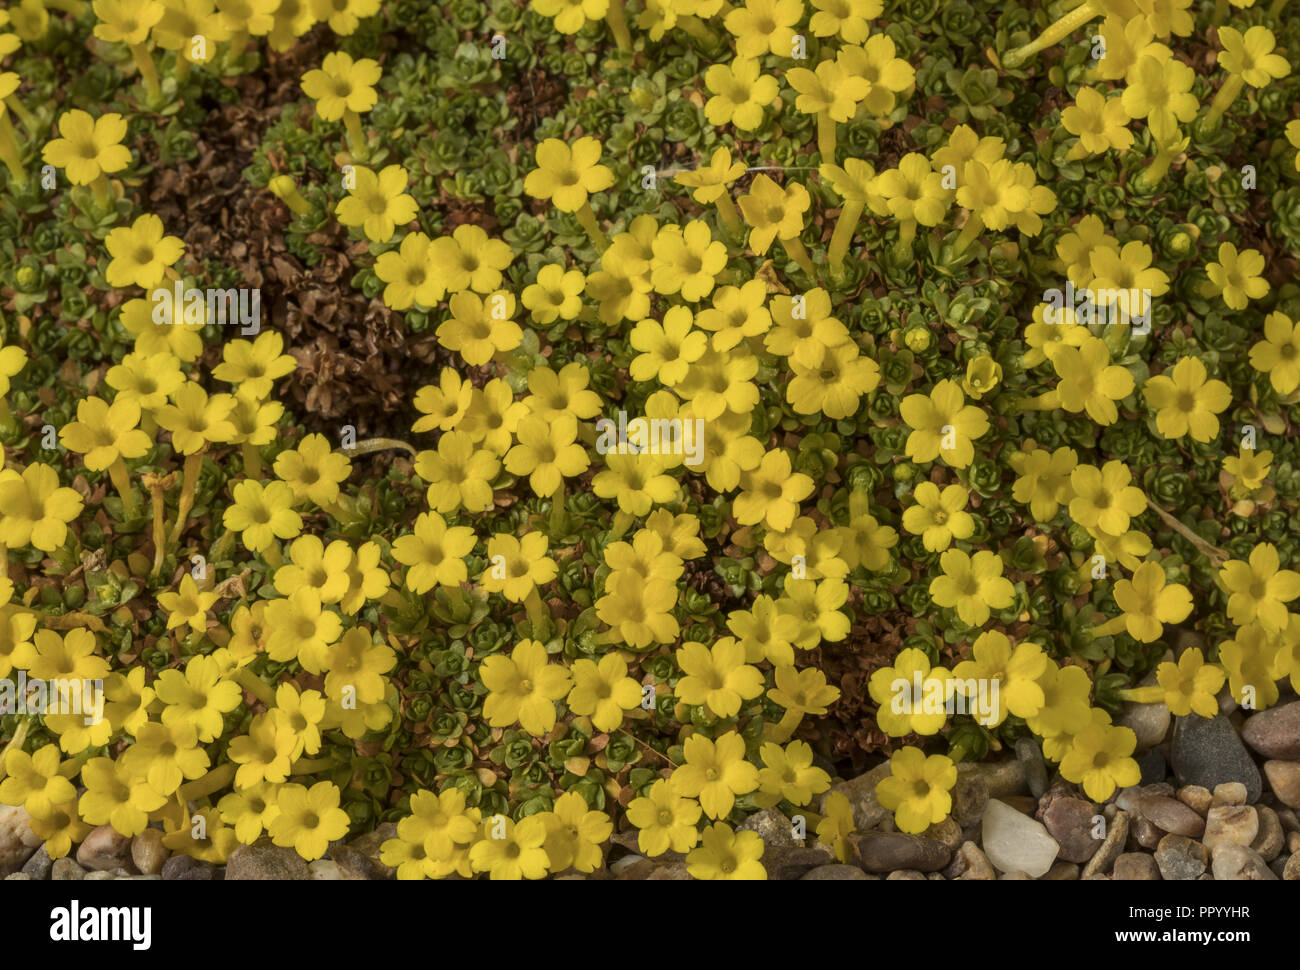 A dionysia, Dionysia tapetodes from Iran. In cultivation. Stock Photo